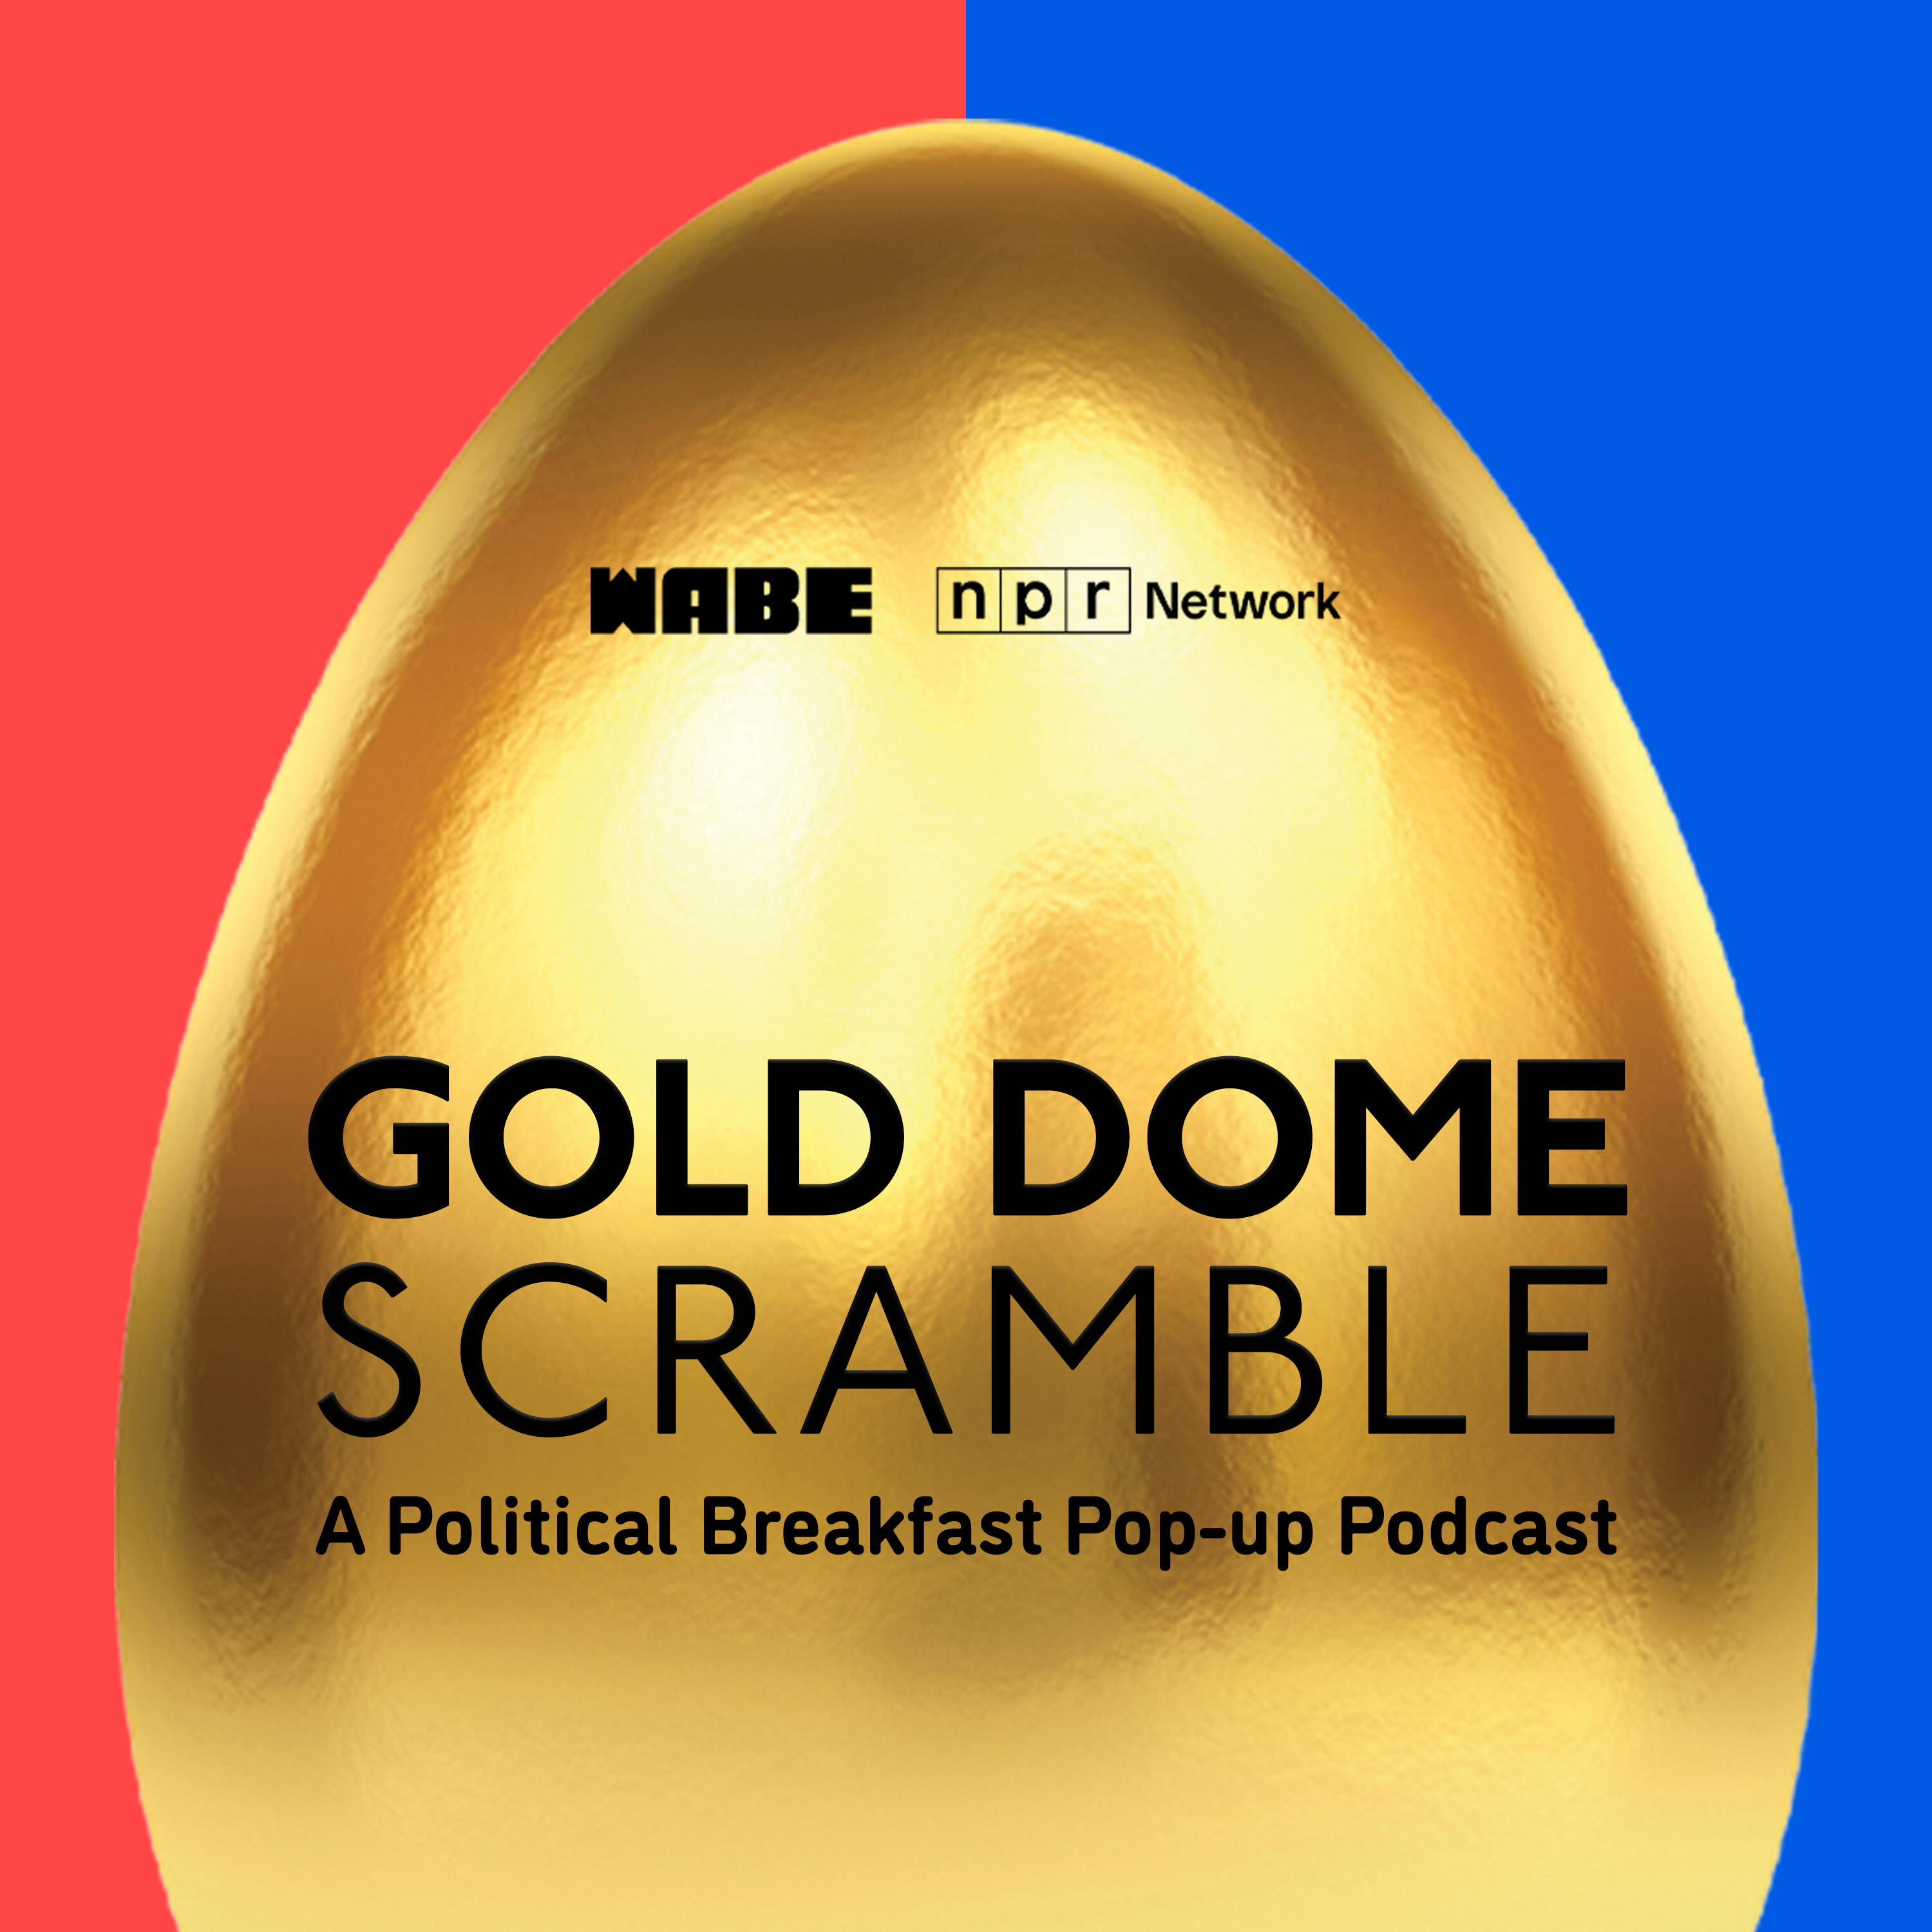 Gold Dome Scramble: Sports betting is back on the table, plus an in-depth look at SB-140, which would most ban gender-affirming care for transgender youth